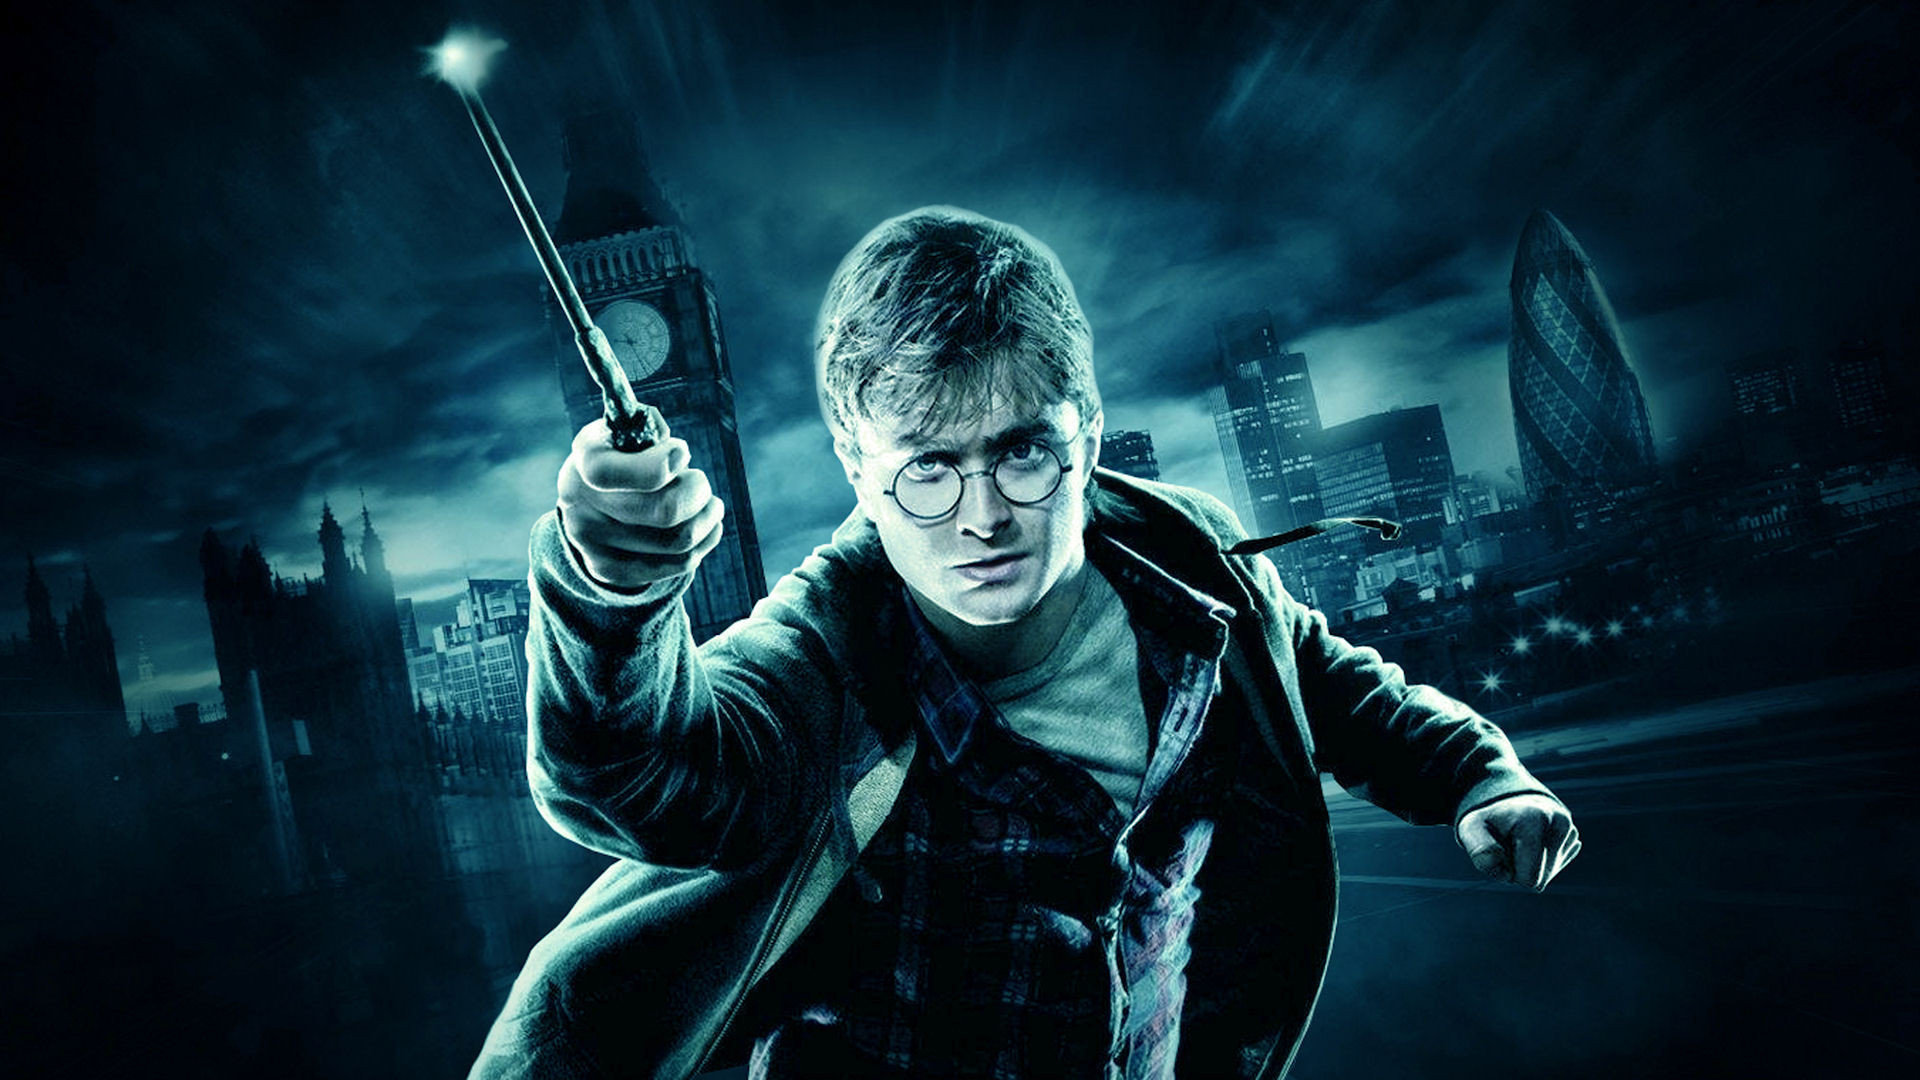 High resolution Harry Potter And The Deathly Hallows: Part 1 hd 1920x1080 background ID:144645 for PC